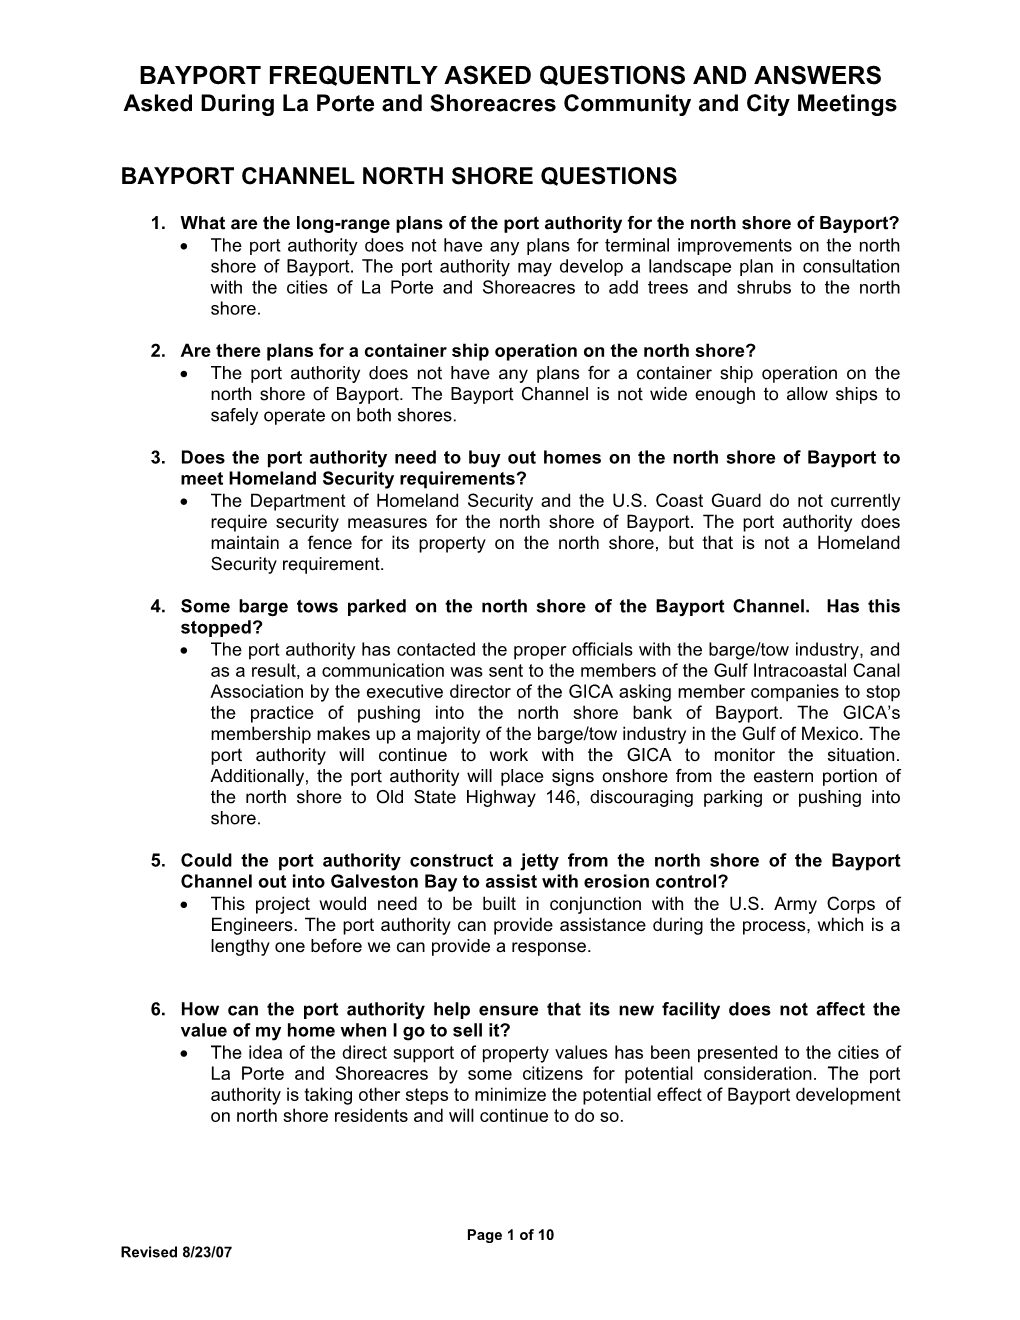 BAYPORT FREQUENTLY ASKED QUESTIONS and ANSWERS Asked During La Porte and Shoreacres Community and City Meetings